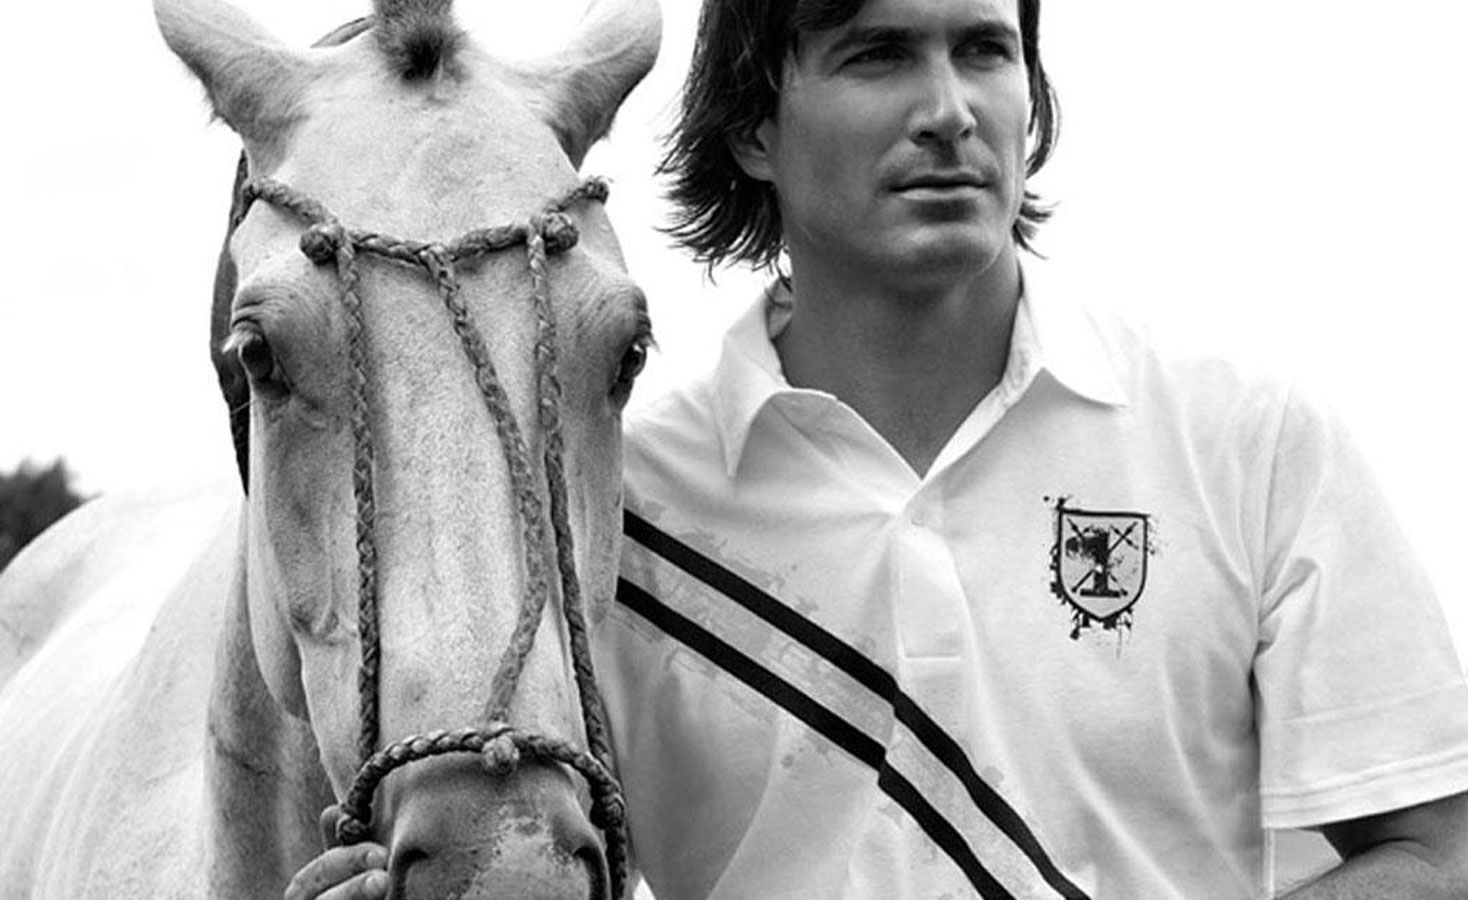 Argentina’s journey in Polo